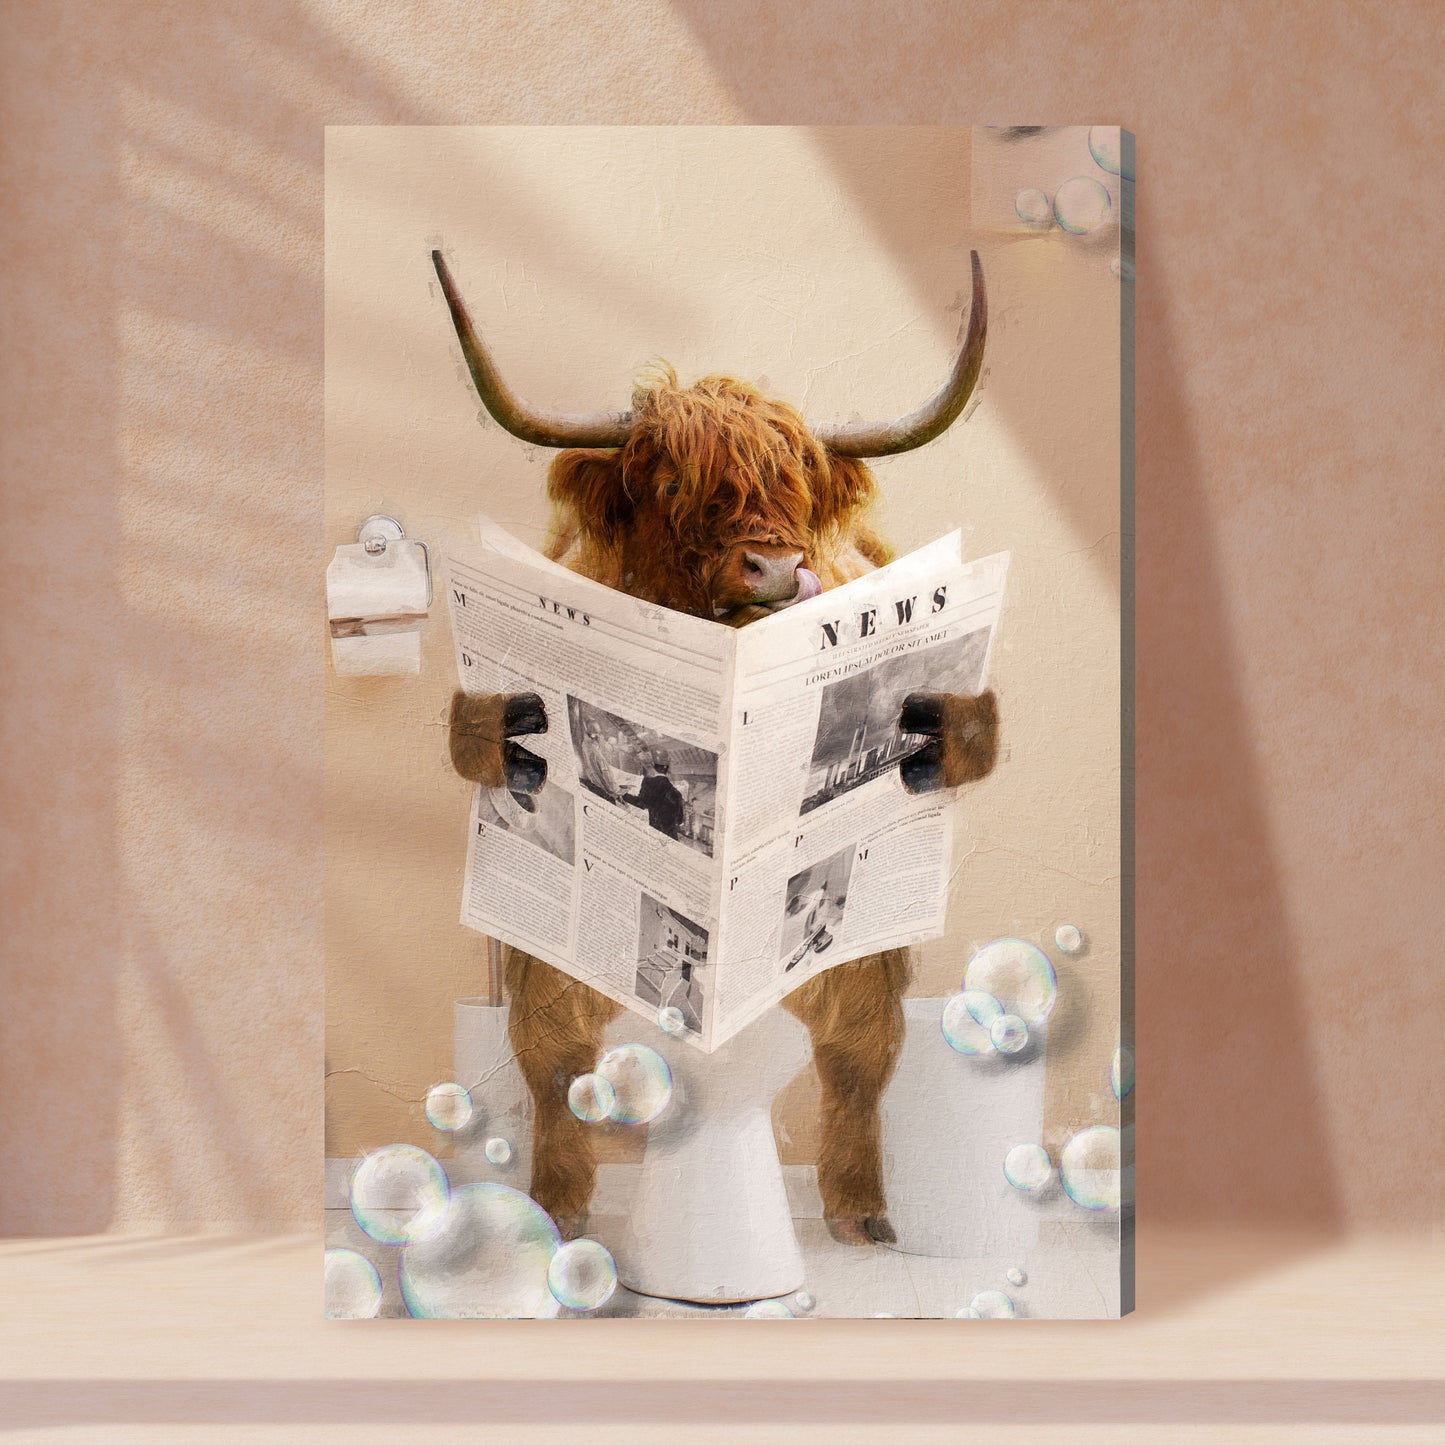 Highland Cow Reading Newspaper Canvas Wall Art (Free Shipping)